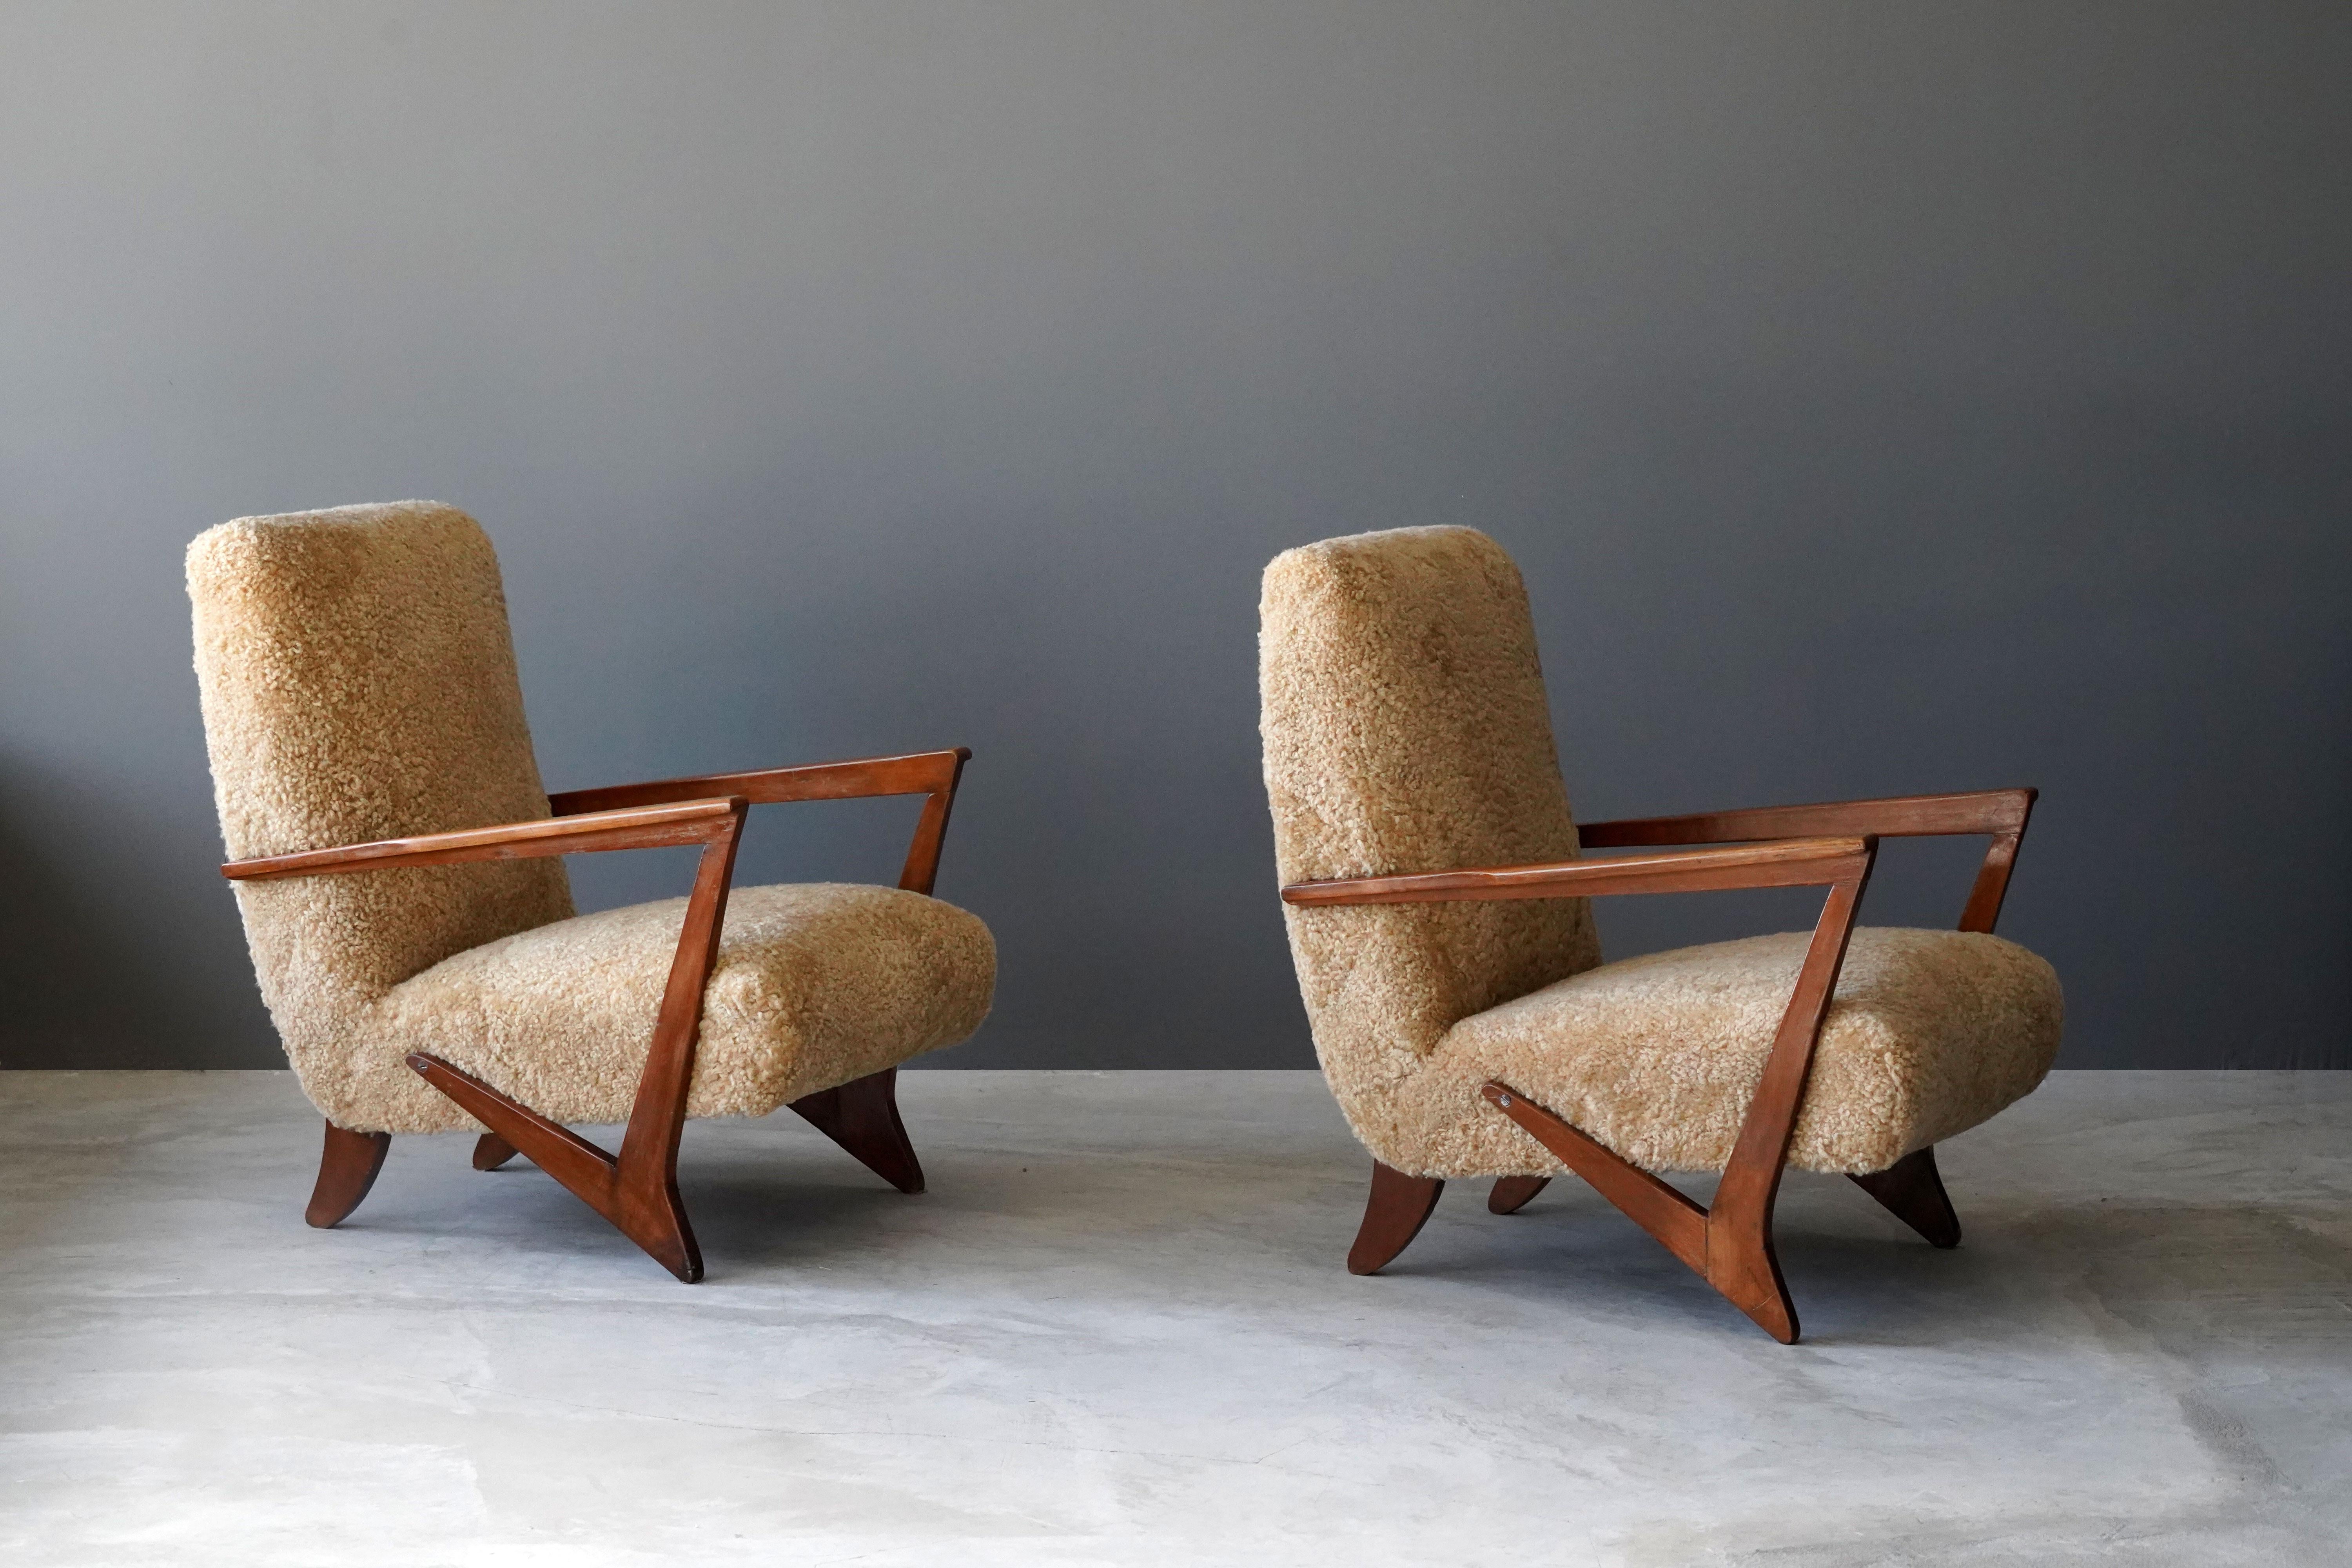 A pair of highly modernist lounge chairs. Designed attributed to Melchiorre Bega, produced 1940s, Italy. Features a highly expressive organic form.

Other designers working in the organic style include: Paolo Buffa, Gio Ponti, Flemming Lassen,